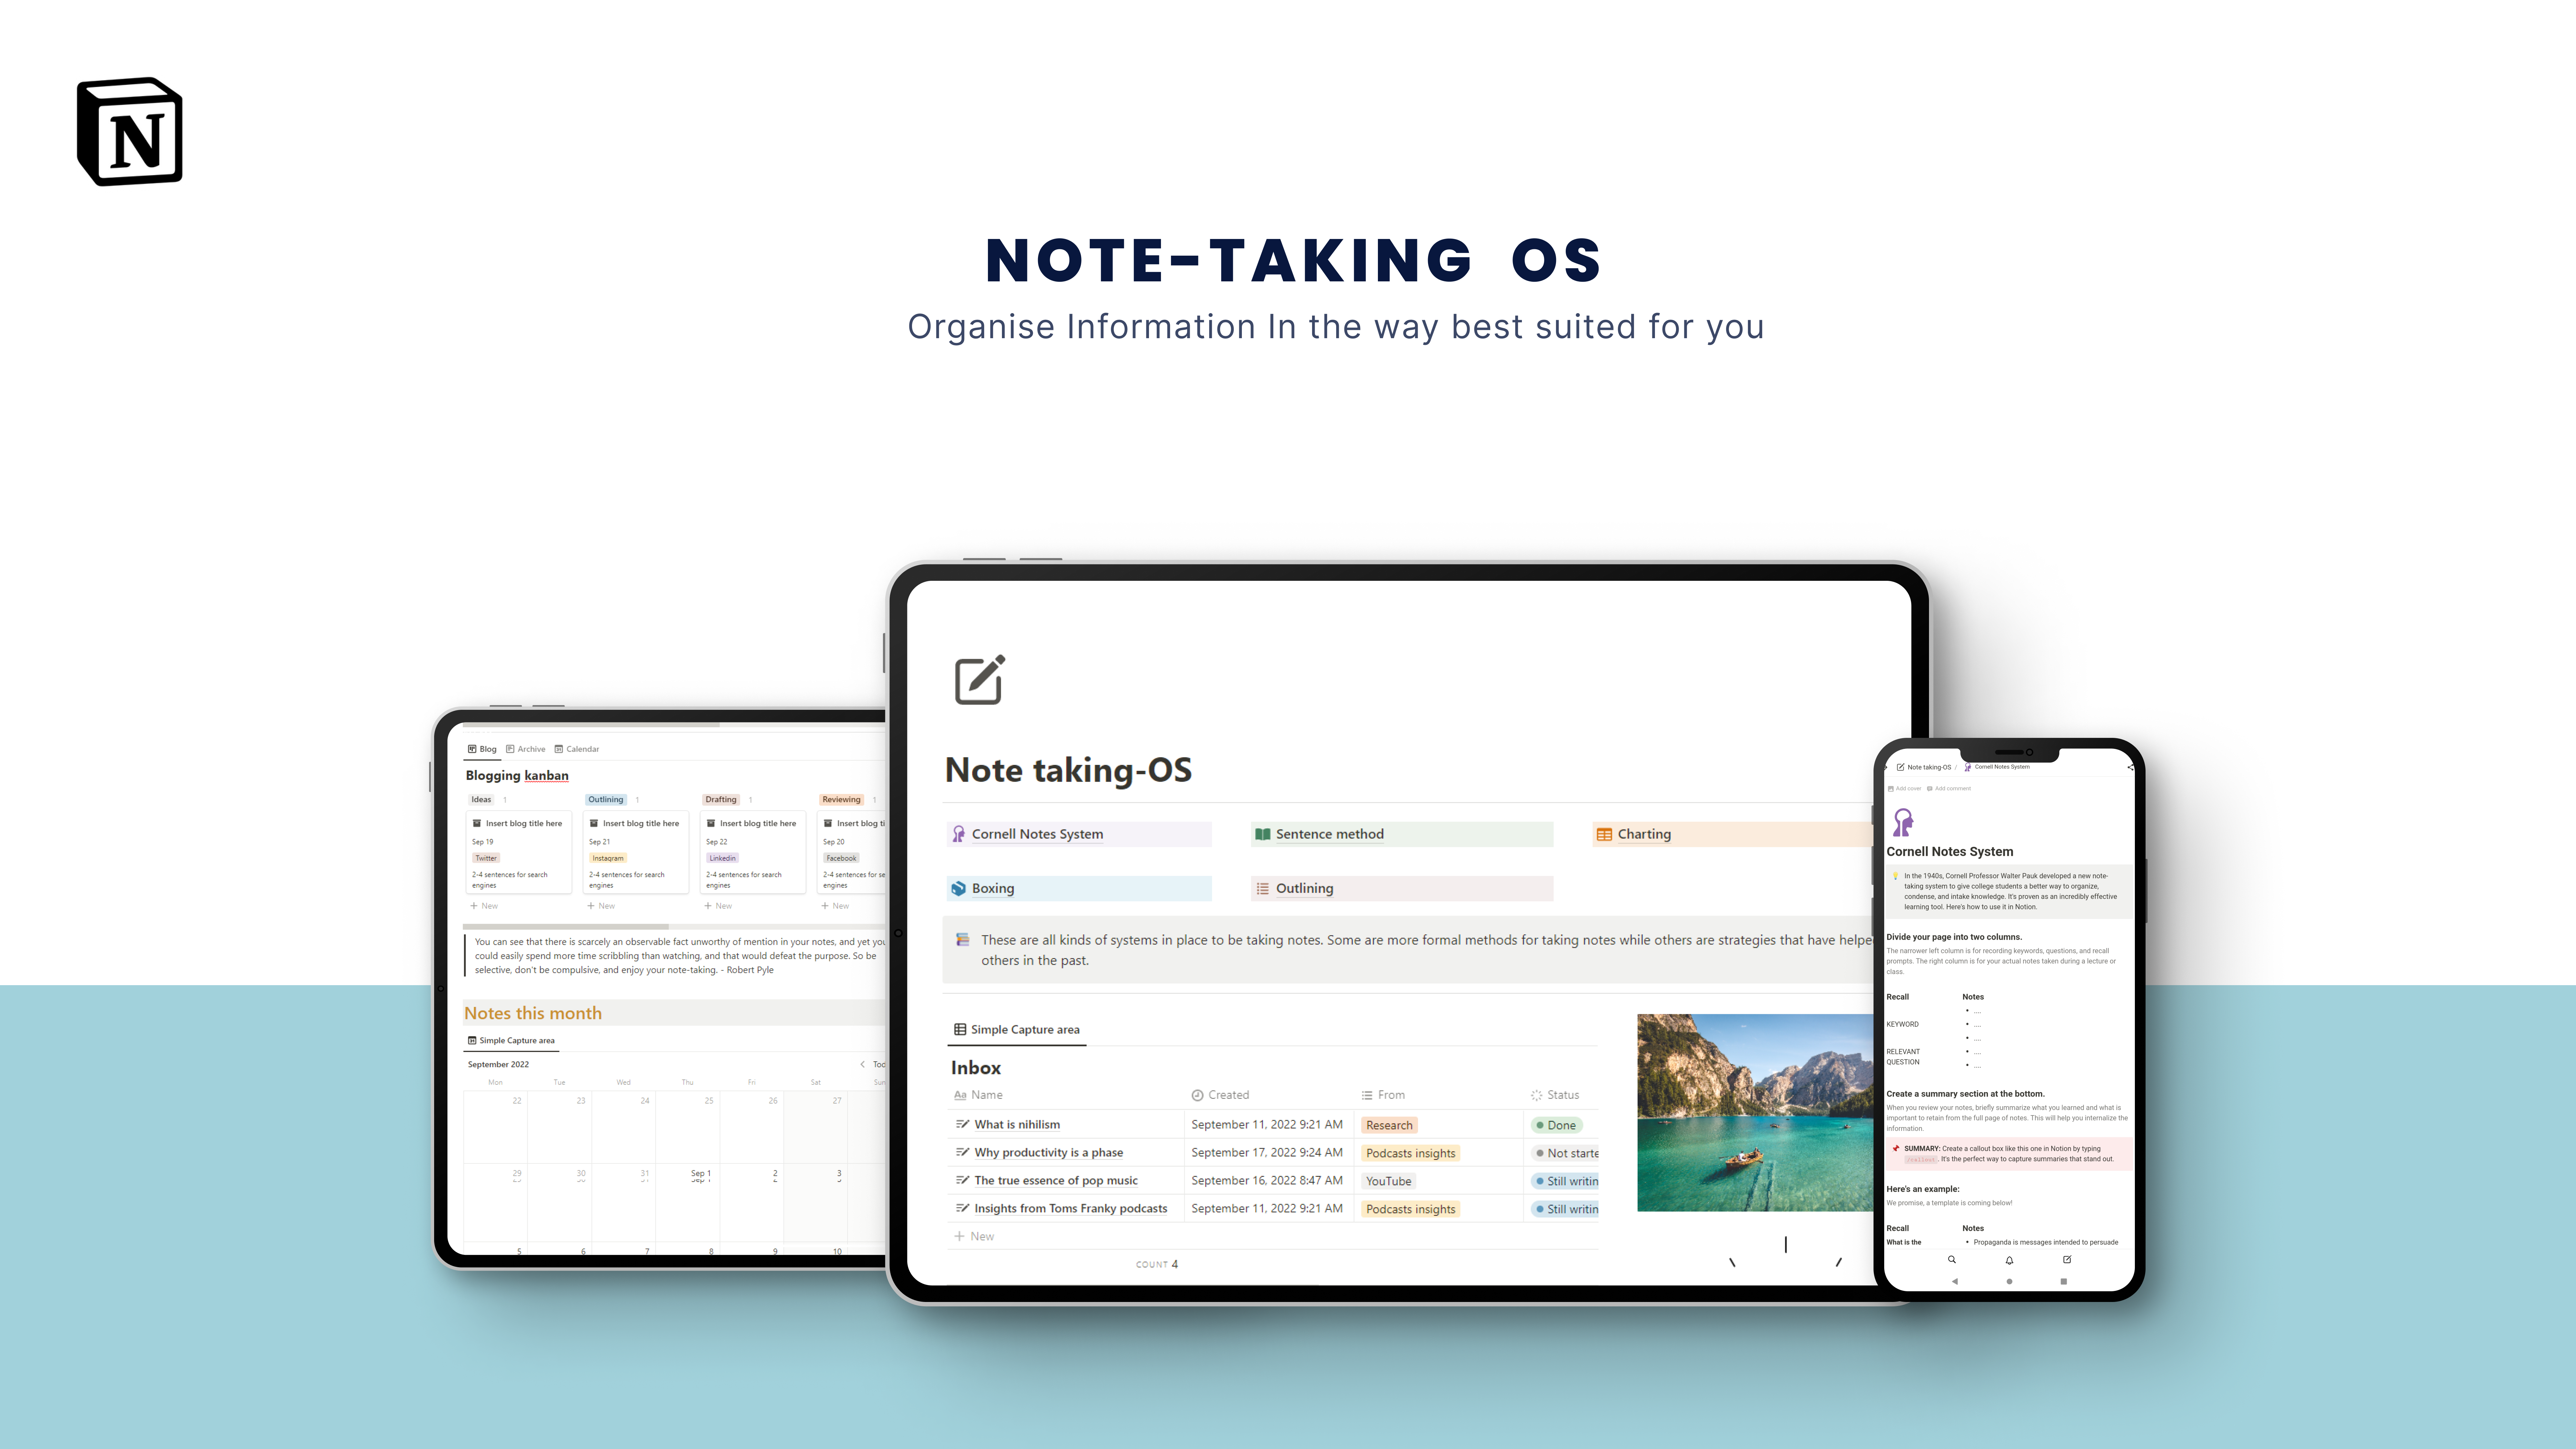 Note-taking OS